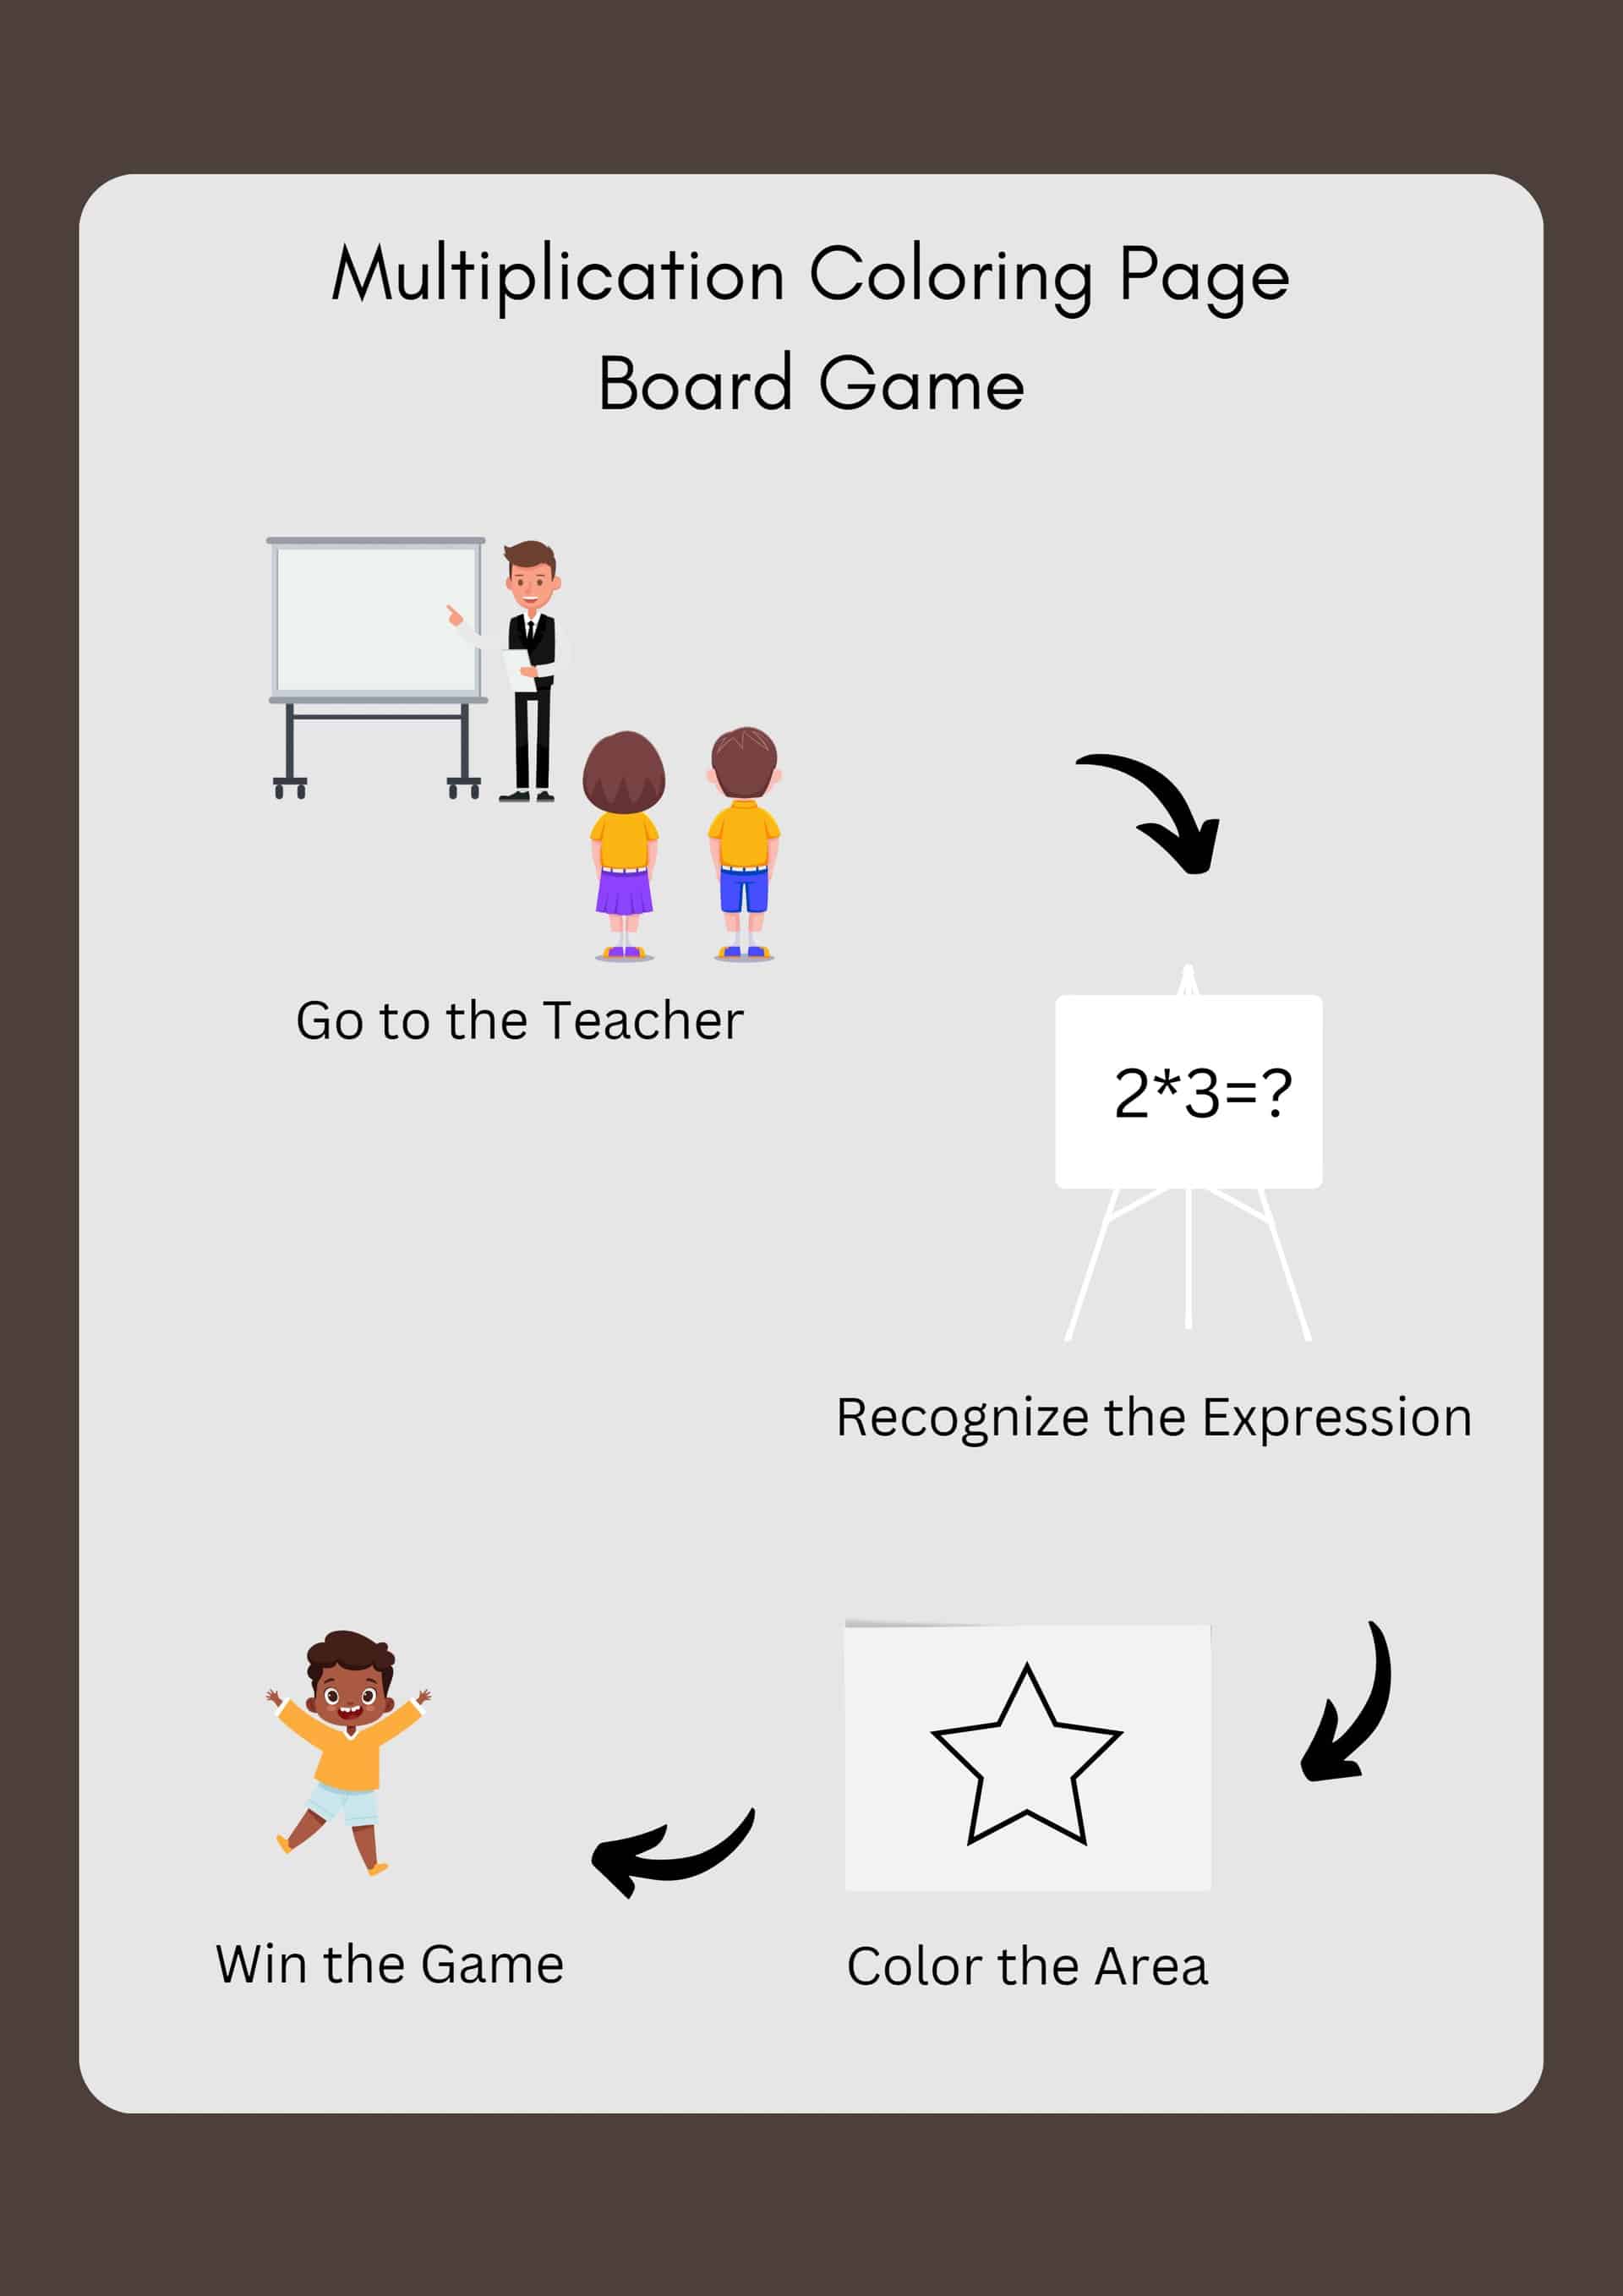 A board game of Board Game with Multiplication